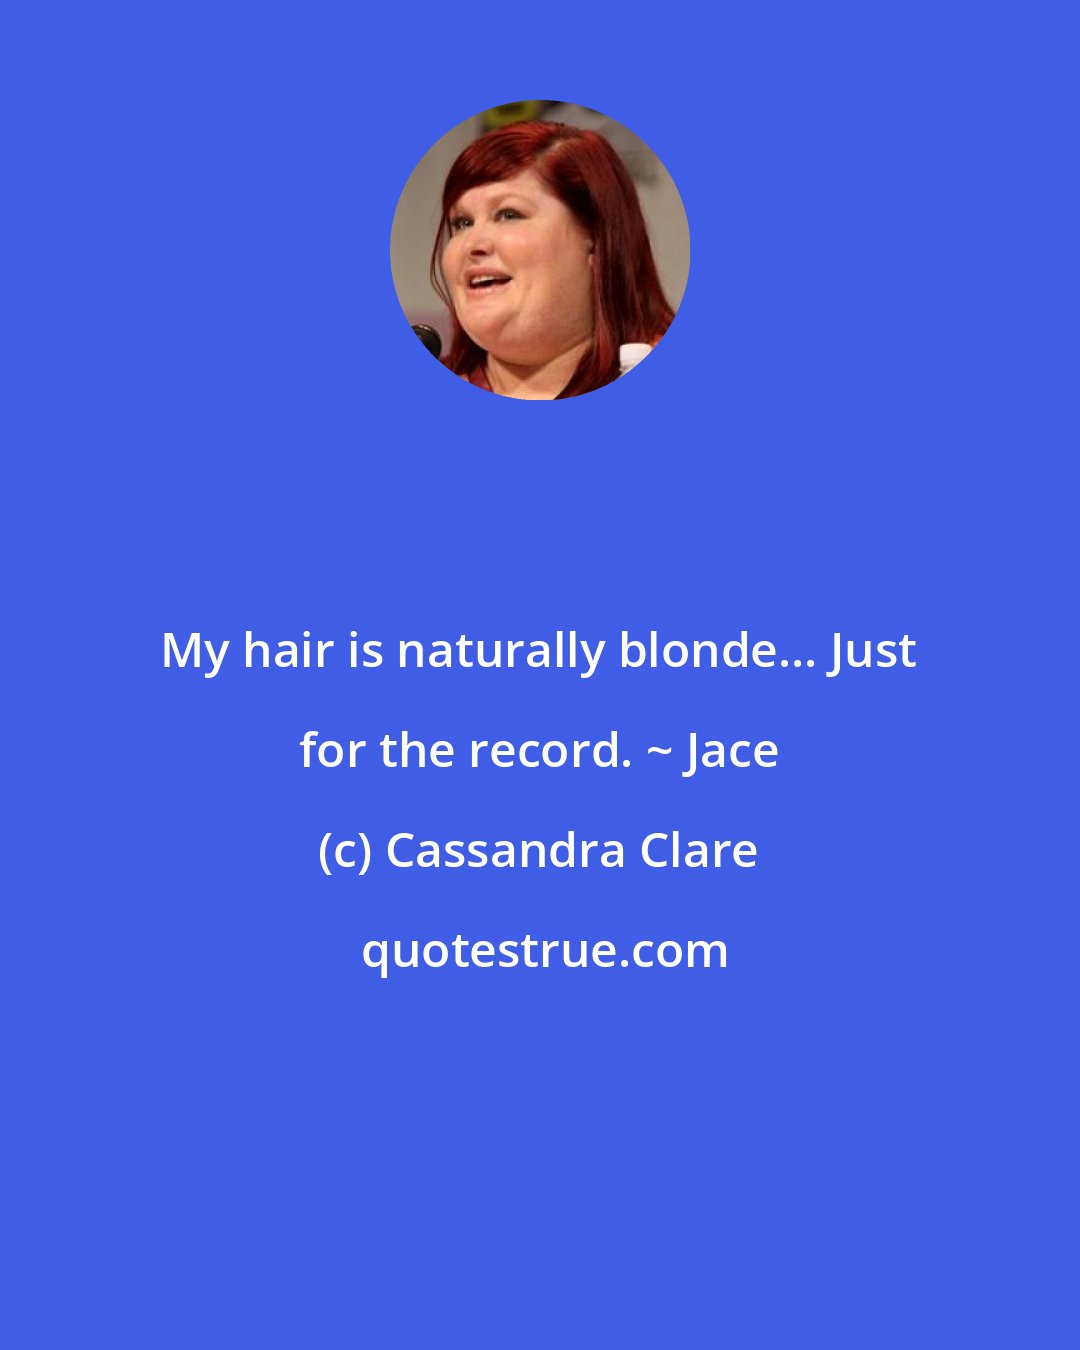 Cassandra Clare: My hair is naturally blonde... Just for the record. ~ Jace